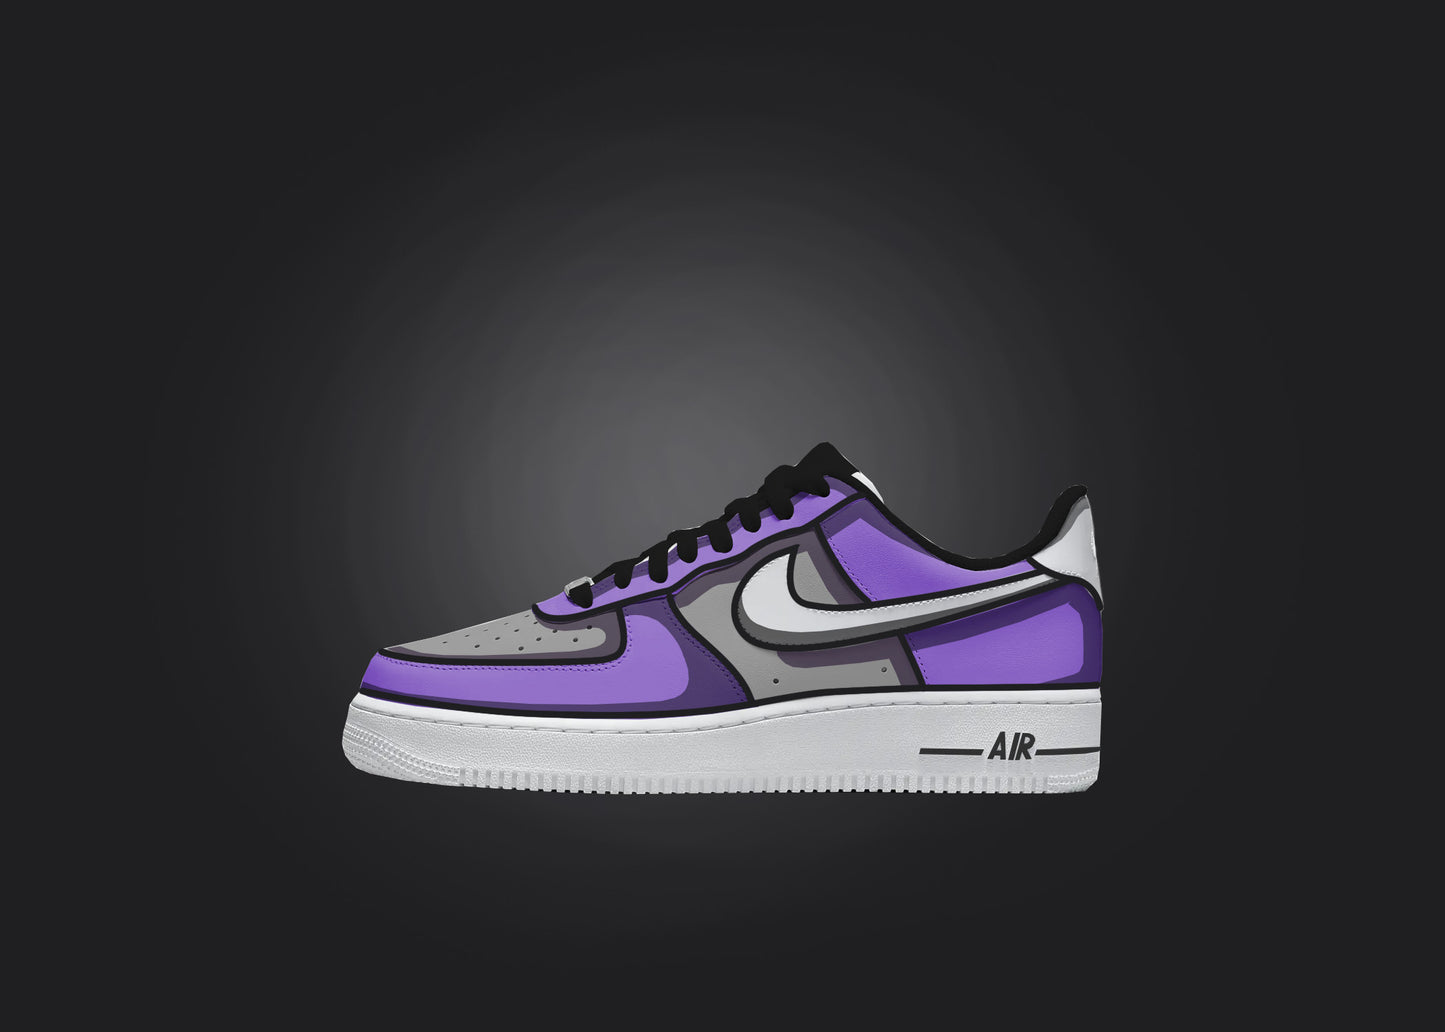 Single Custom Air Force 1 sneaker in purple and gray displayed on a black backdrop, emphasizing the unique cartoon shading.